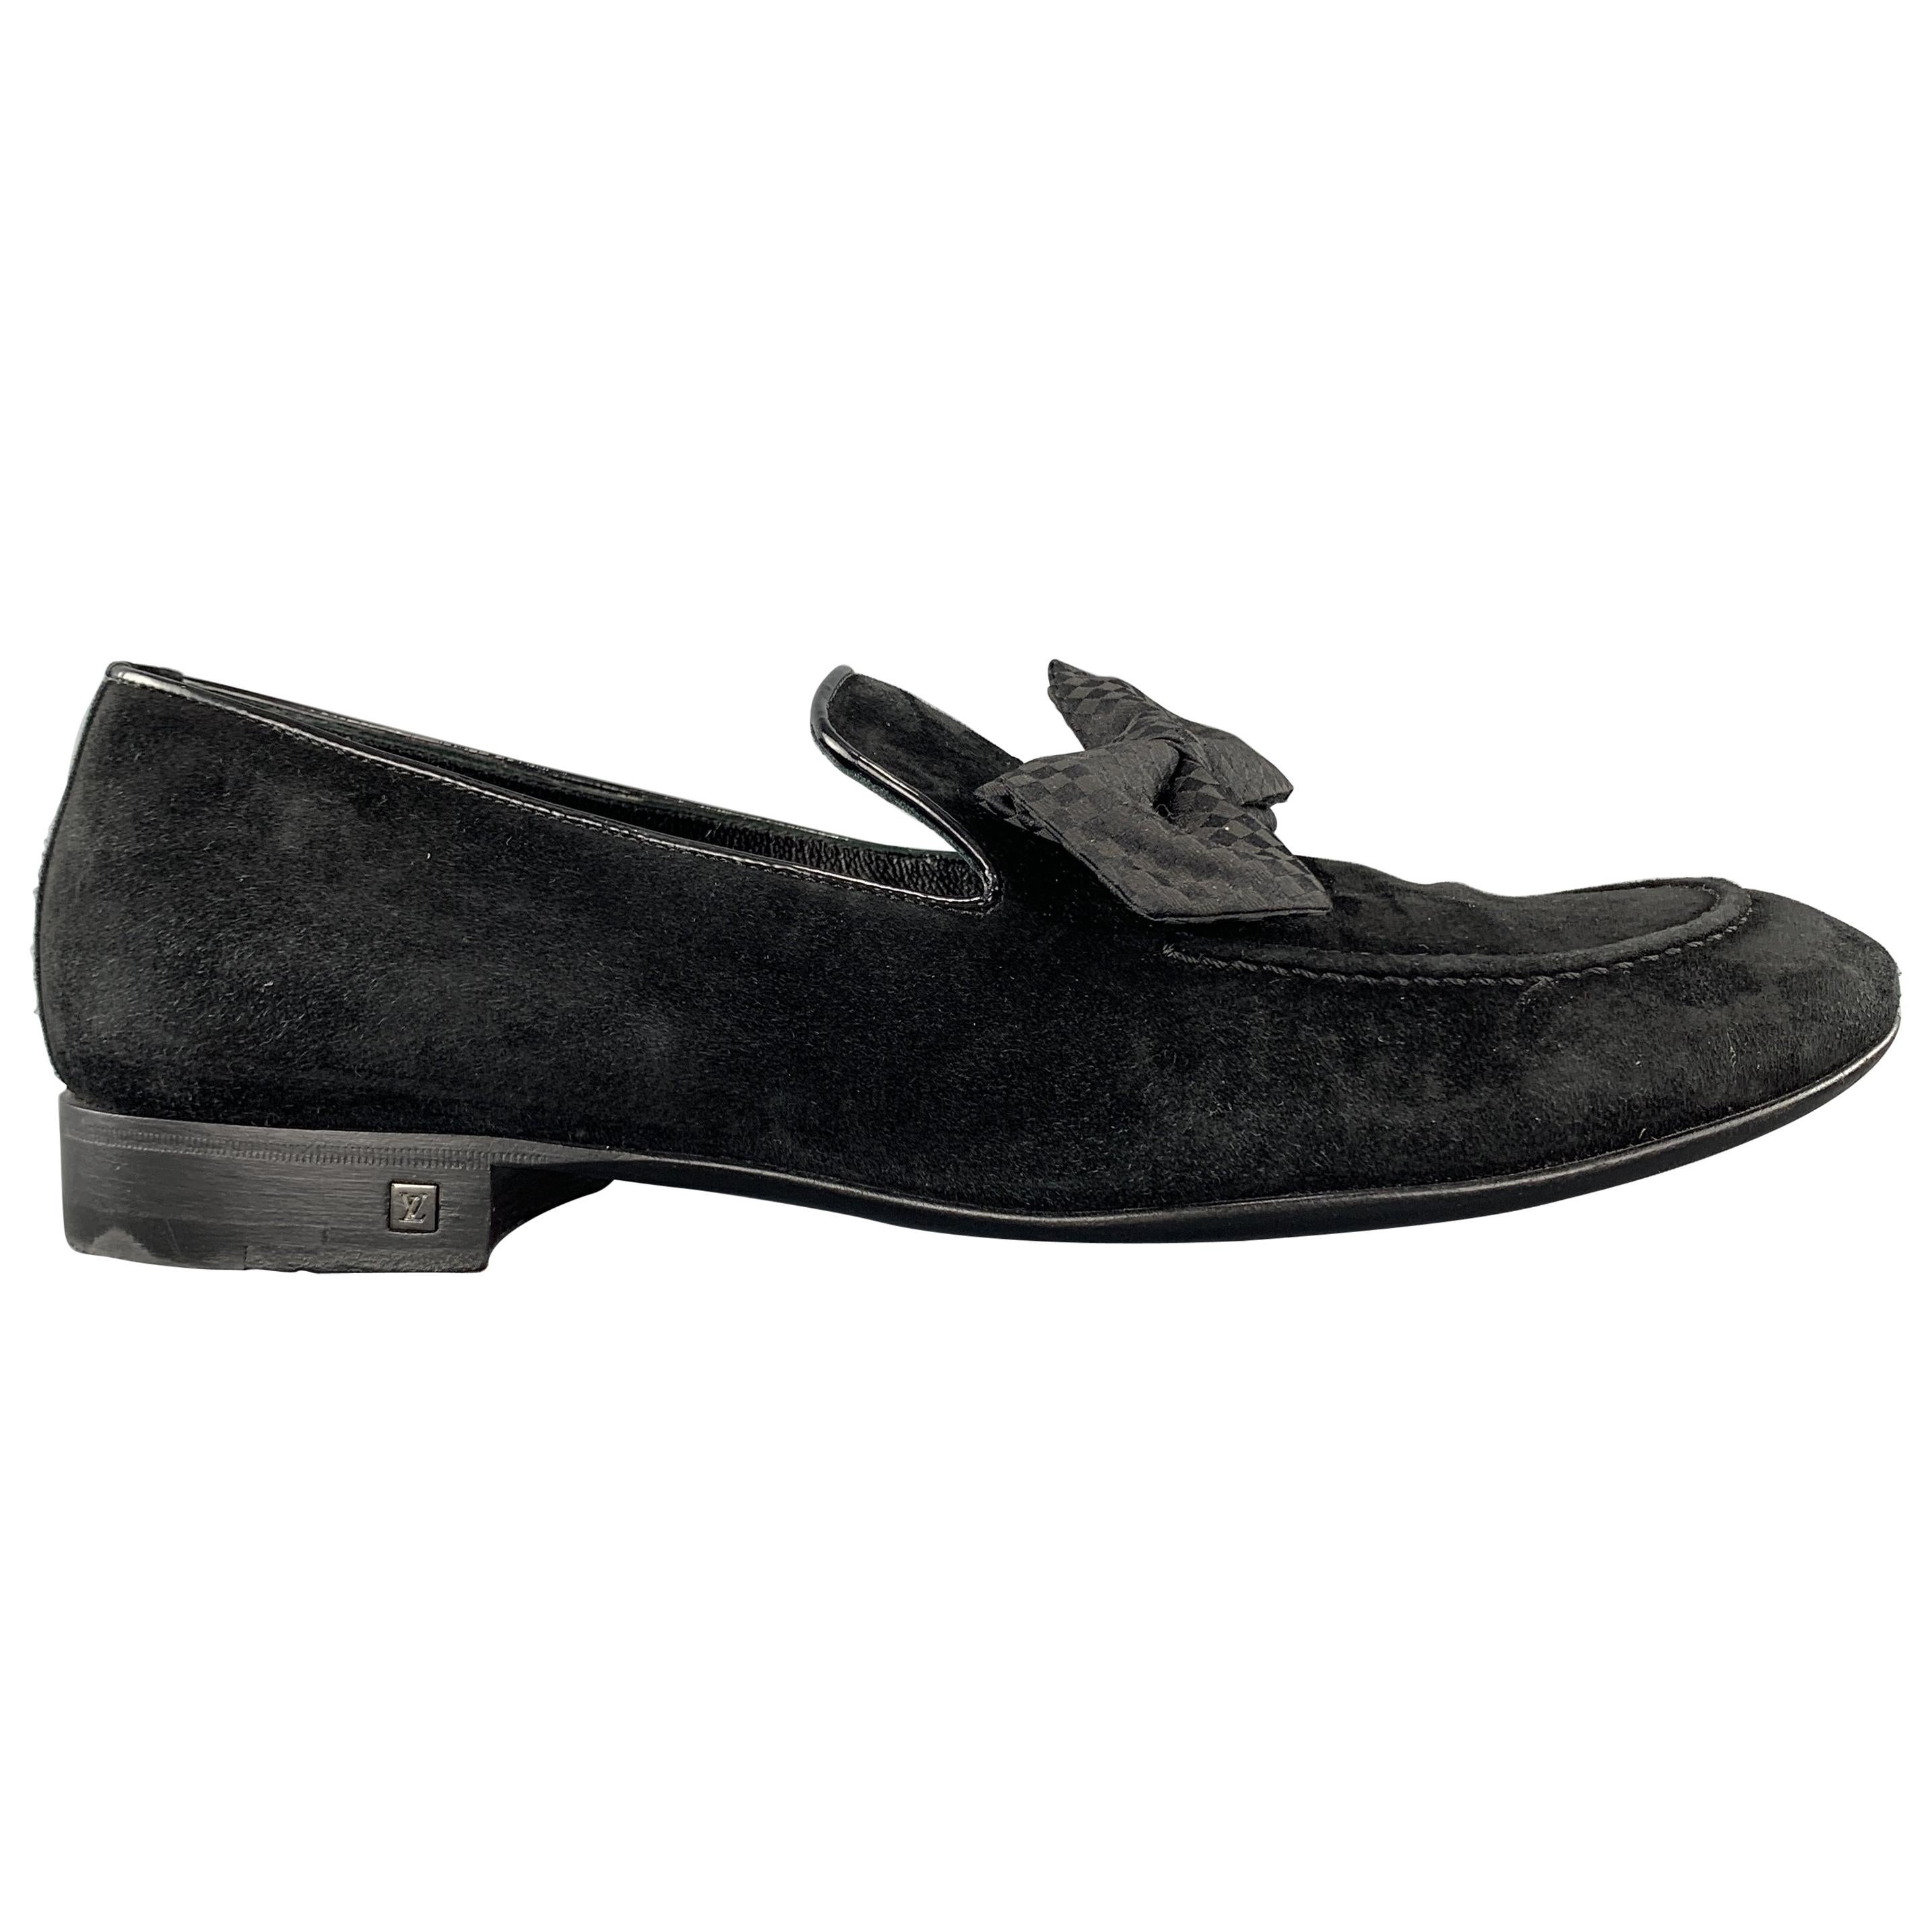 Louis Vuitton Size 9 Black Suede Slip on Bow Loafers